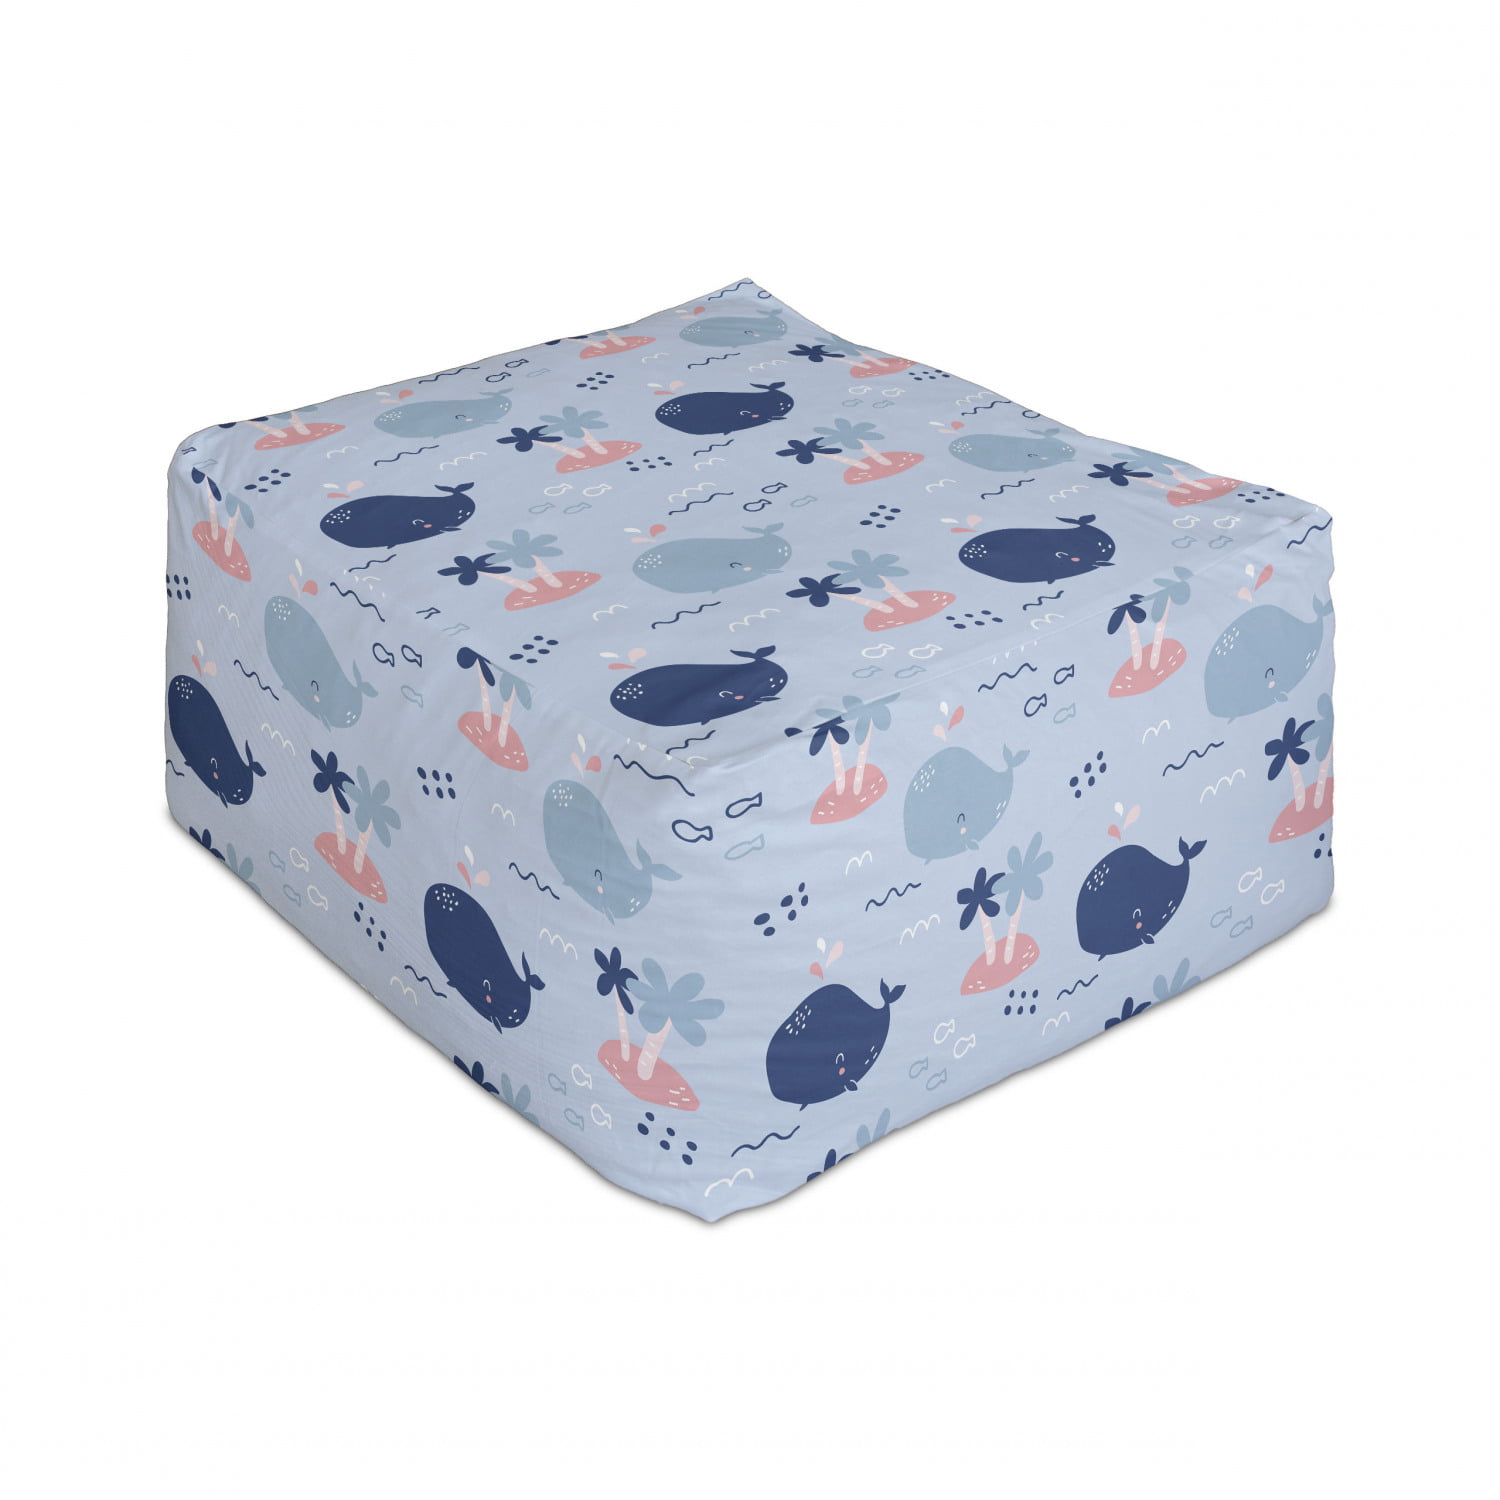 Multicolor Under Desk Foot Stool for Living Room Office Ottoman with Cover 25 Ambesonne Nautical Rectangle Pouf Marine Theme Underwater Animals Different Kind Blue and Red Fishes Images